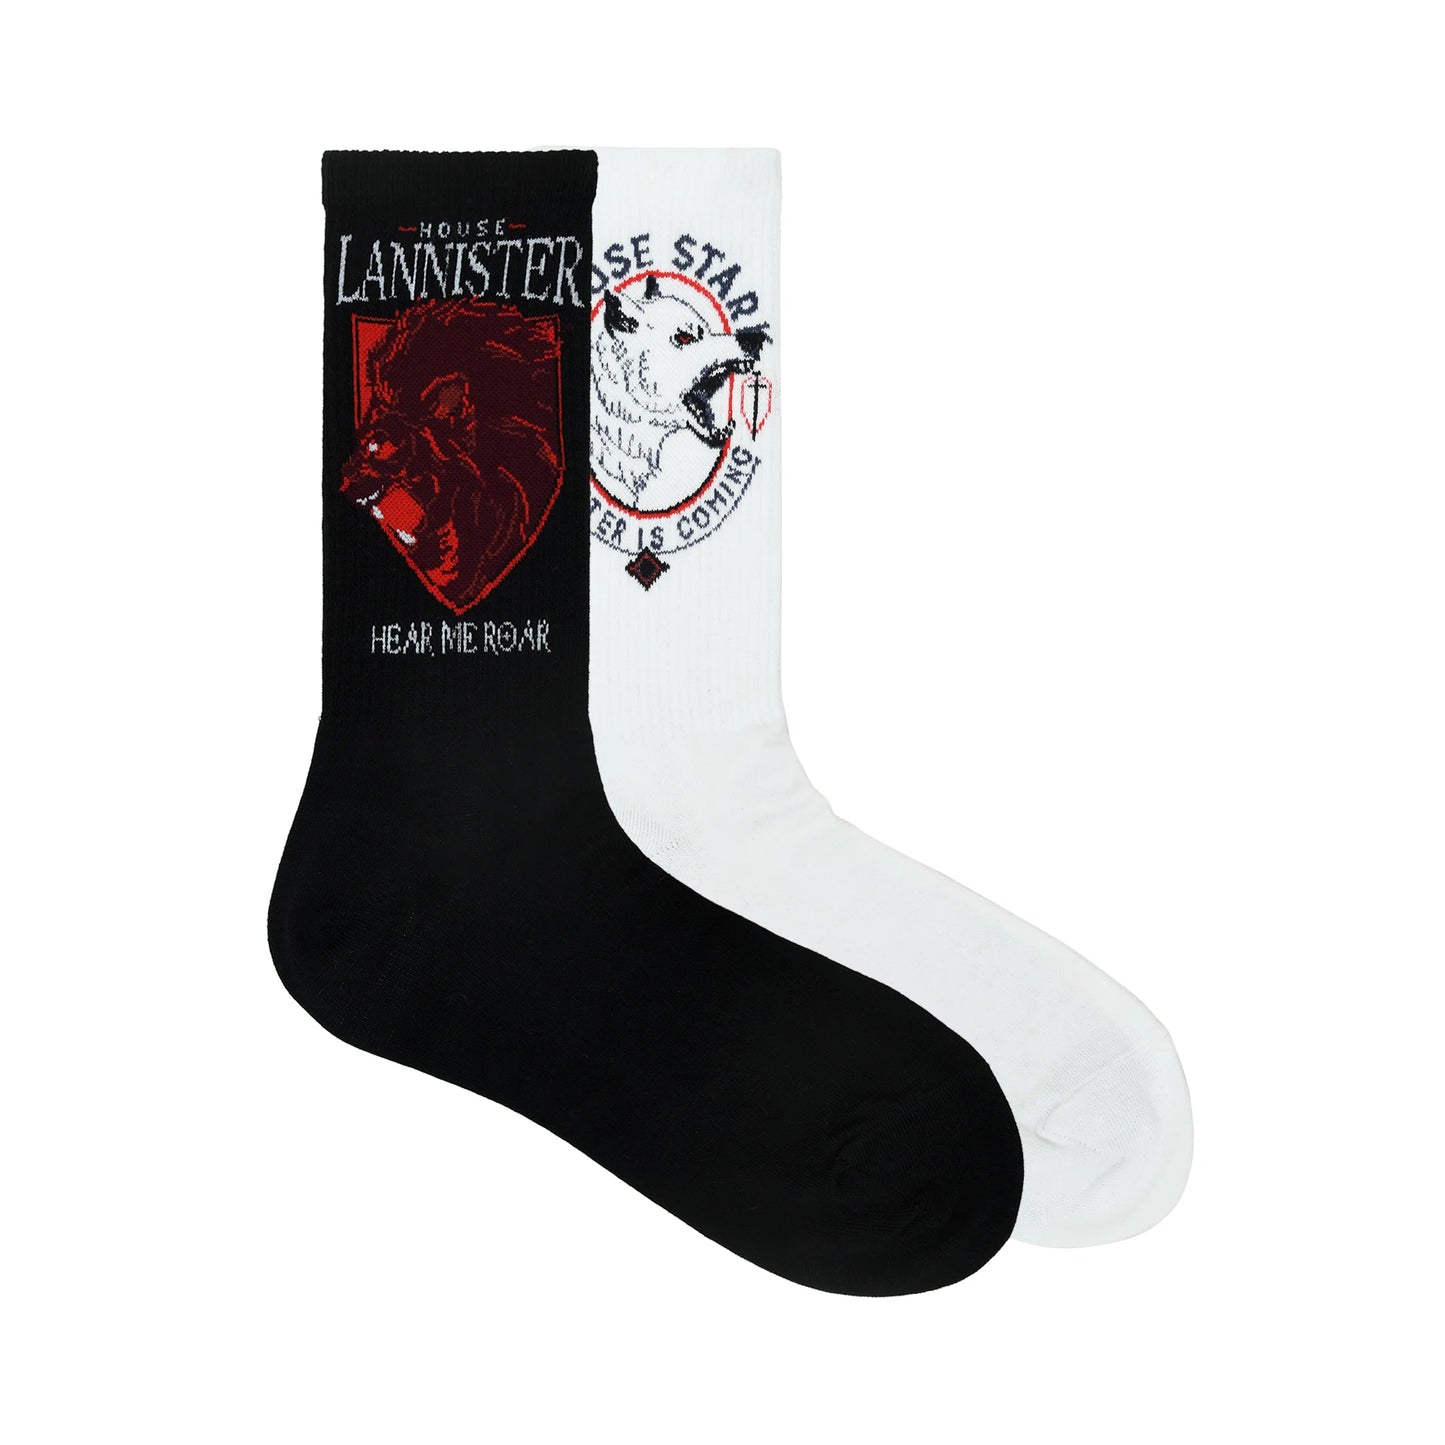 BALENZIA X GAME OF THRONES HOUSE LANNISTER SIGIL & HOUSE OF STARK CREW LENGTH RIB SOCKS FOR MEN (FREE SIZE)(PACK OF 2 PAIRS/1U)WHITE & BLACK Your Cart Subtotal